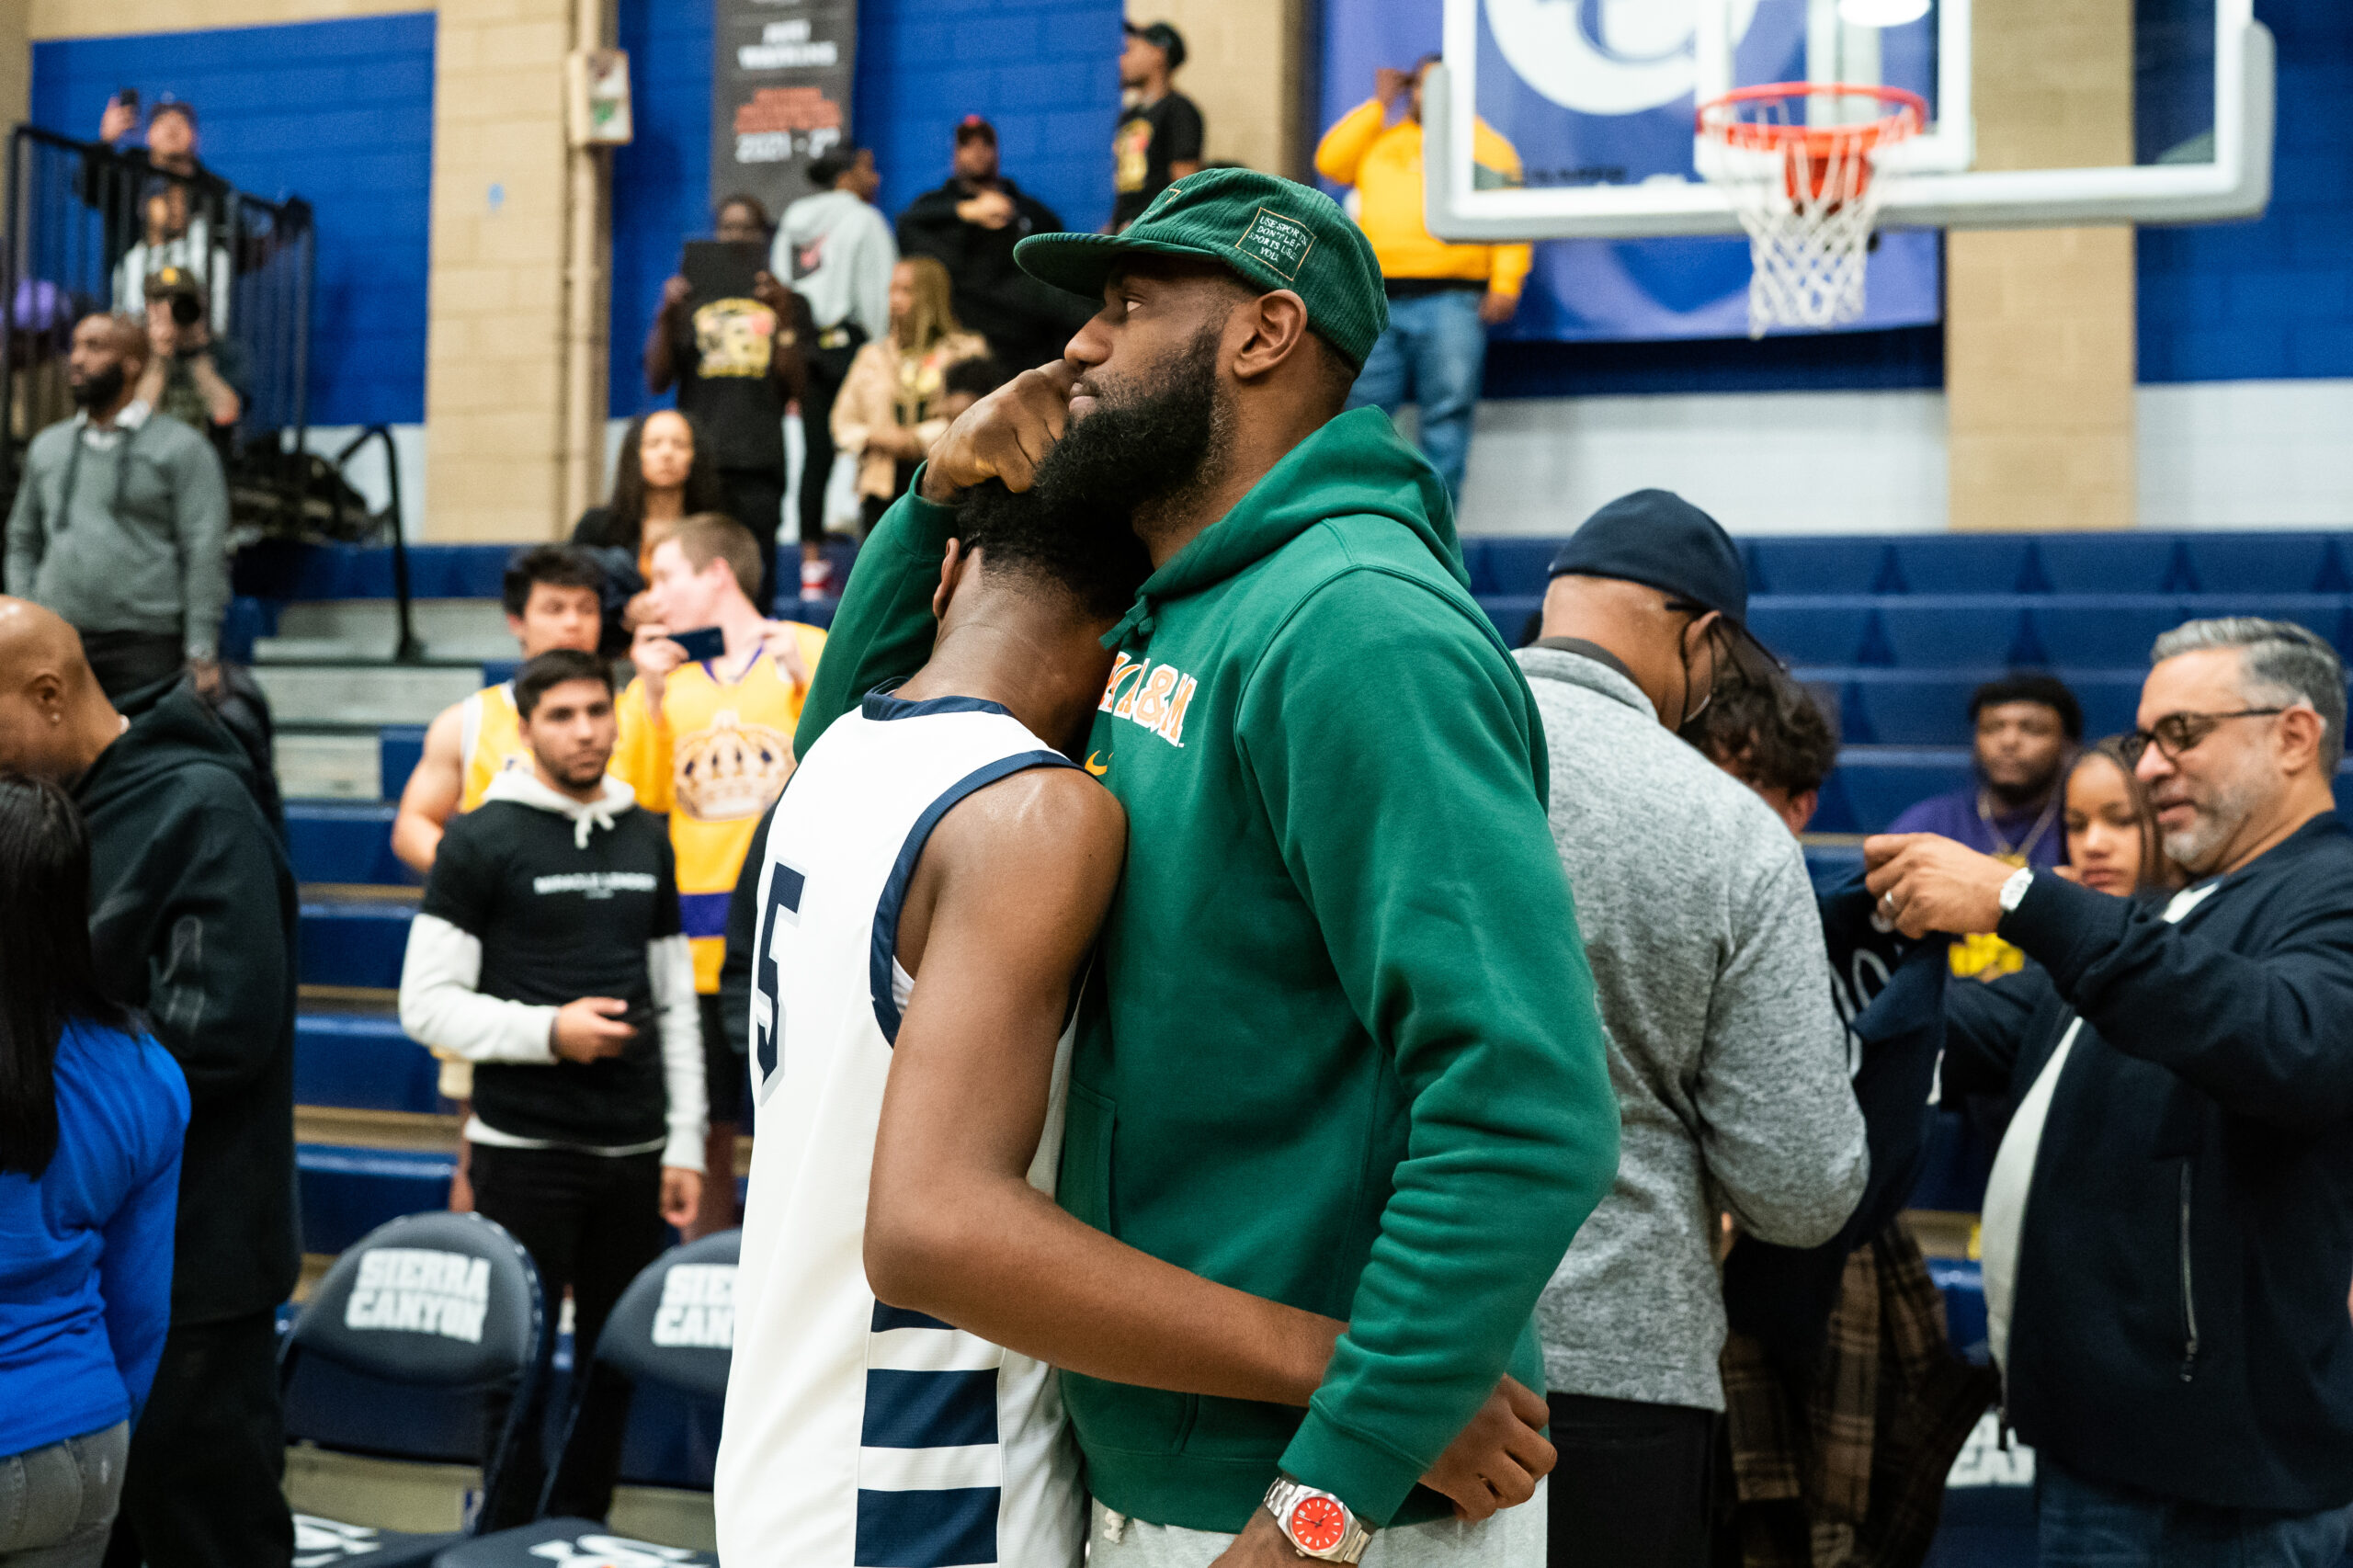 CHATSWORTH, CALIFORNIA - NOVEMBER 16: Bryce James hugs his dad, LeBron James, after the Sierra Canyon vs King Drew boys basketball game at Sierra Canyon High School on November 16, 2022 in Chatsworth, California. (Photo by Cassy Athena/Getty Images)